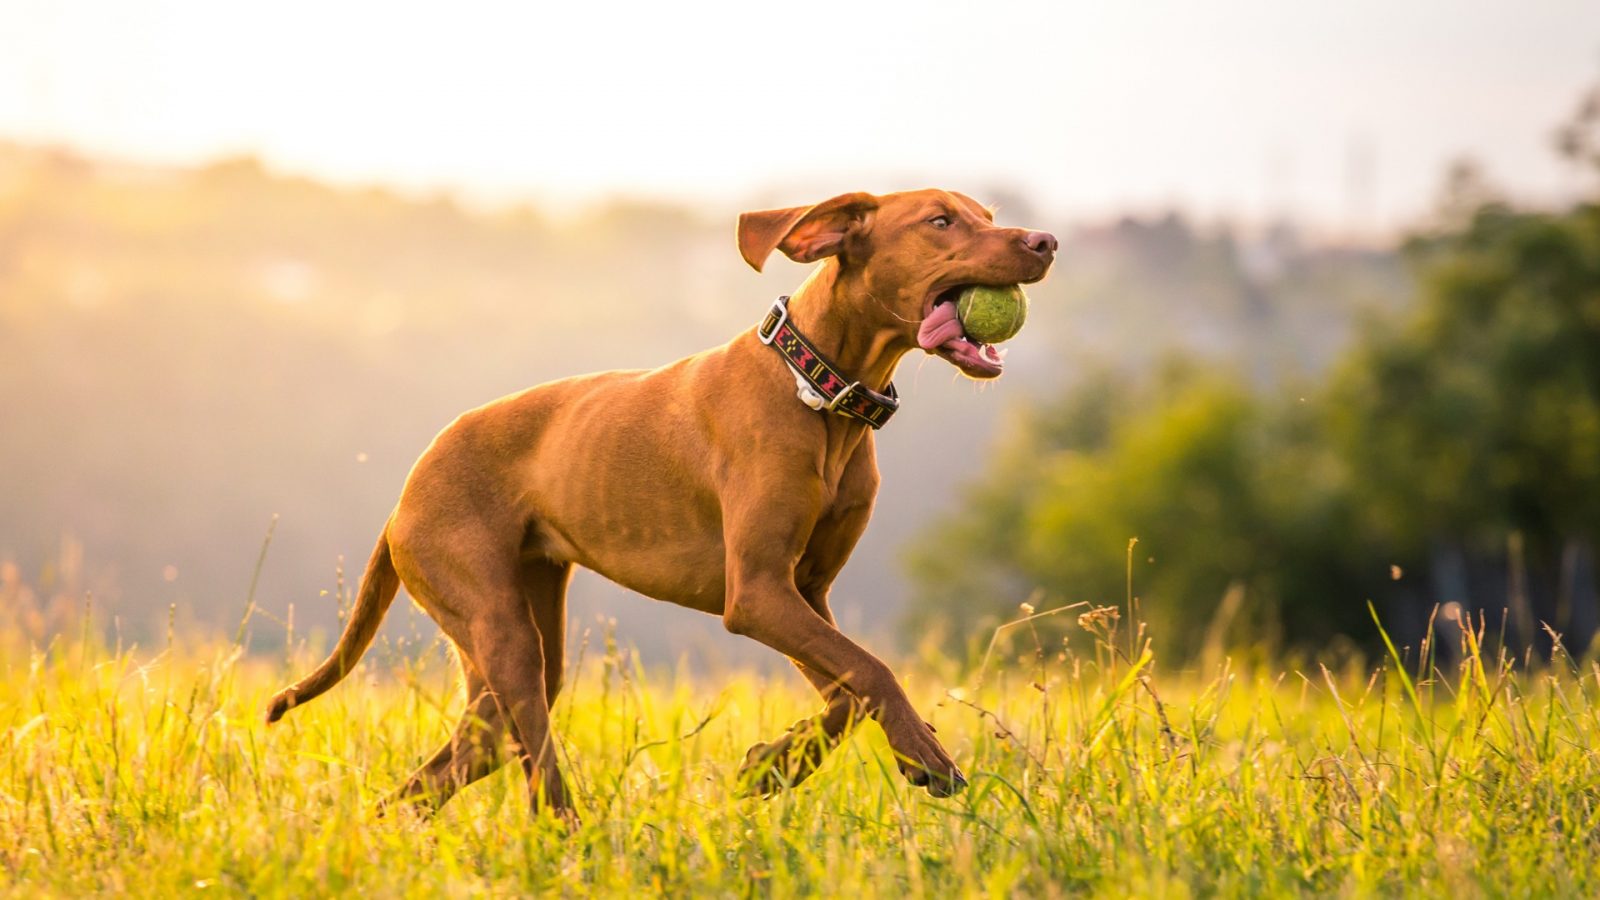 7 in 10 People Can’t Identity More Than 15 of These Dog Breeds 🐕 — Let’s See If You Can Do It Hungarian Vizsla